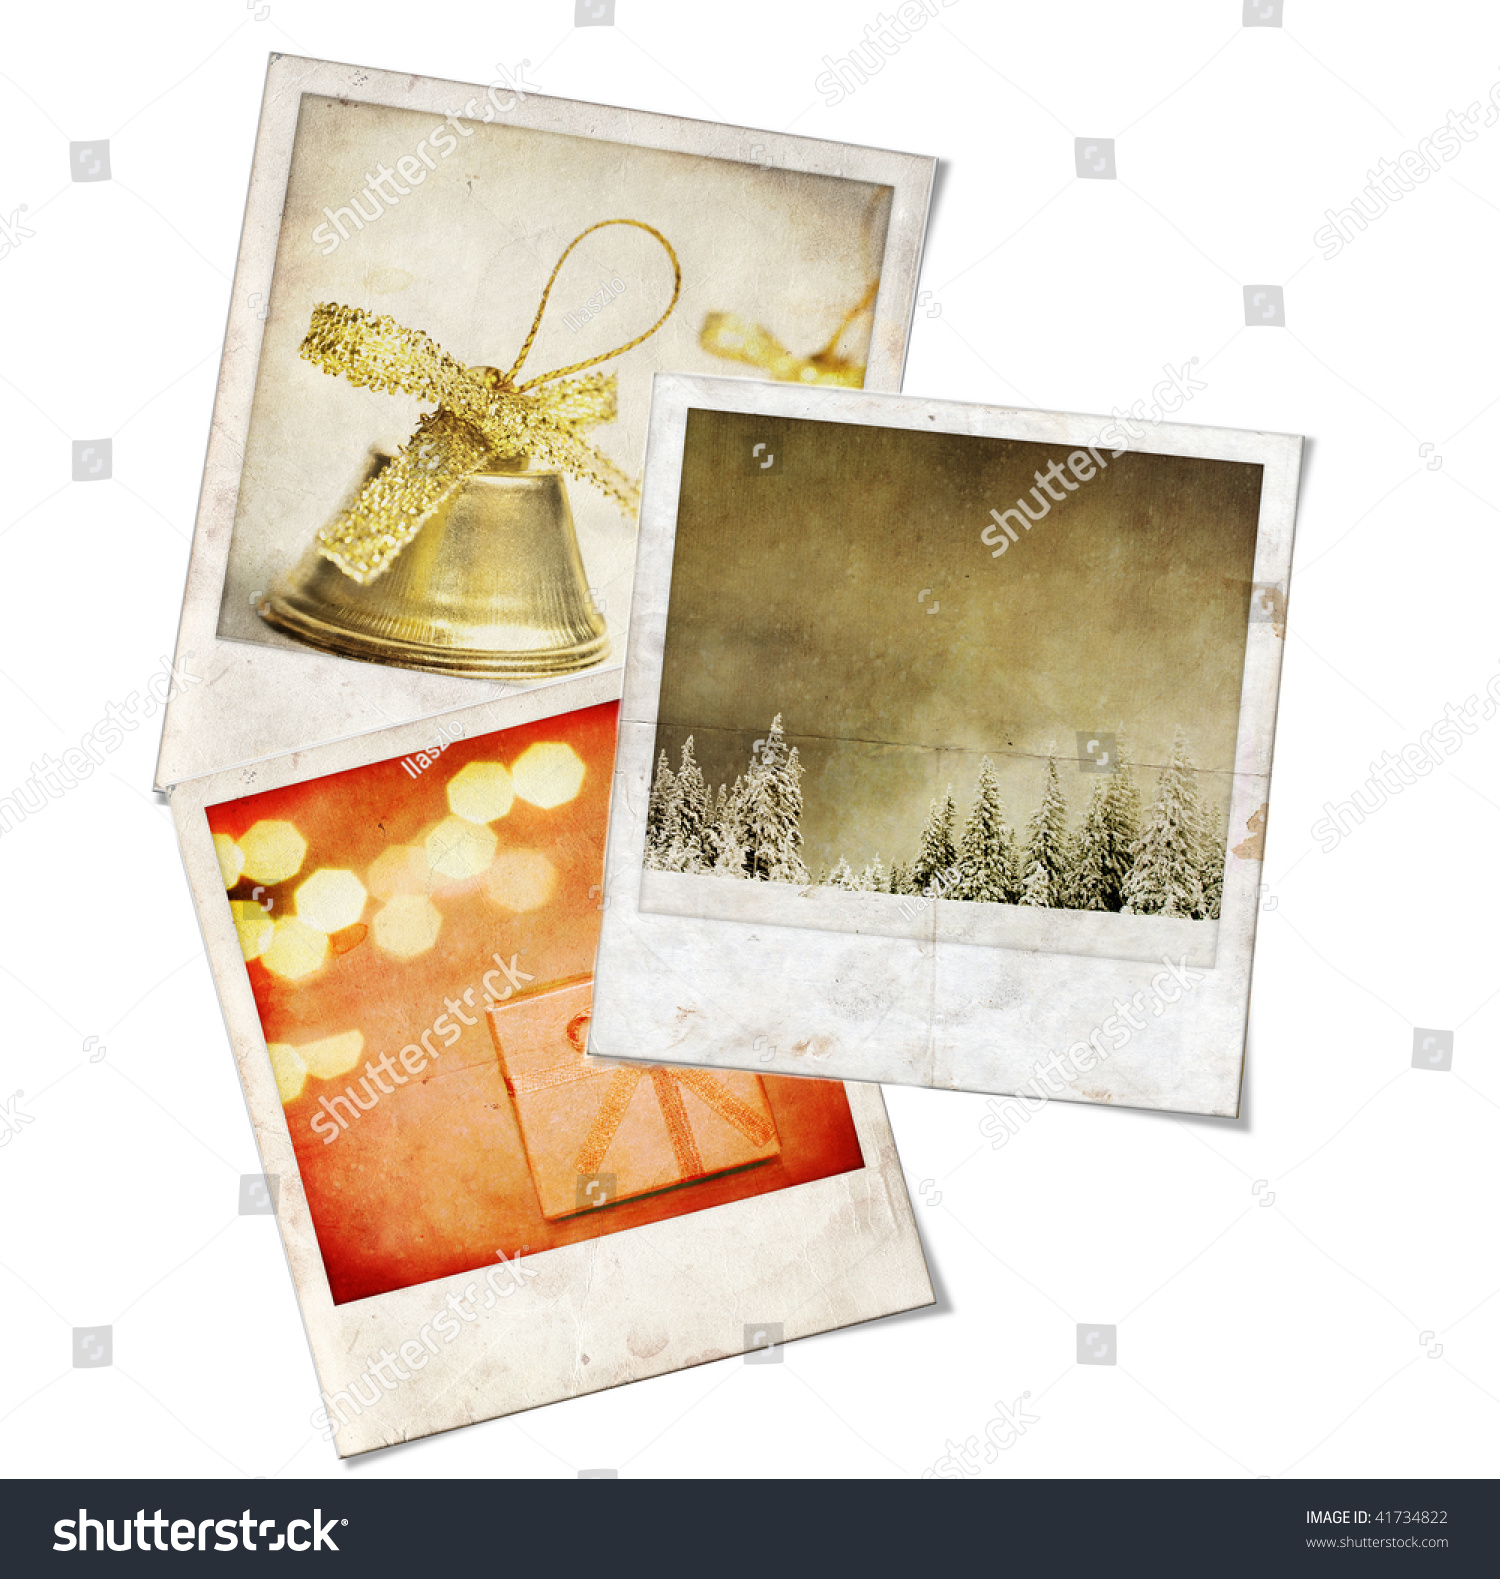 Three Vintage instant photo picture with christmas themes #41734822